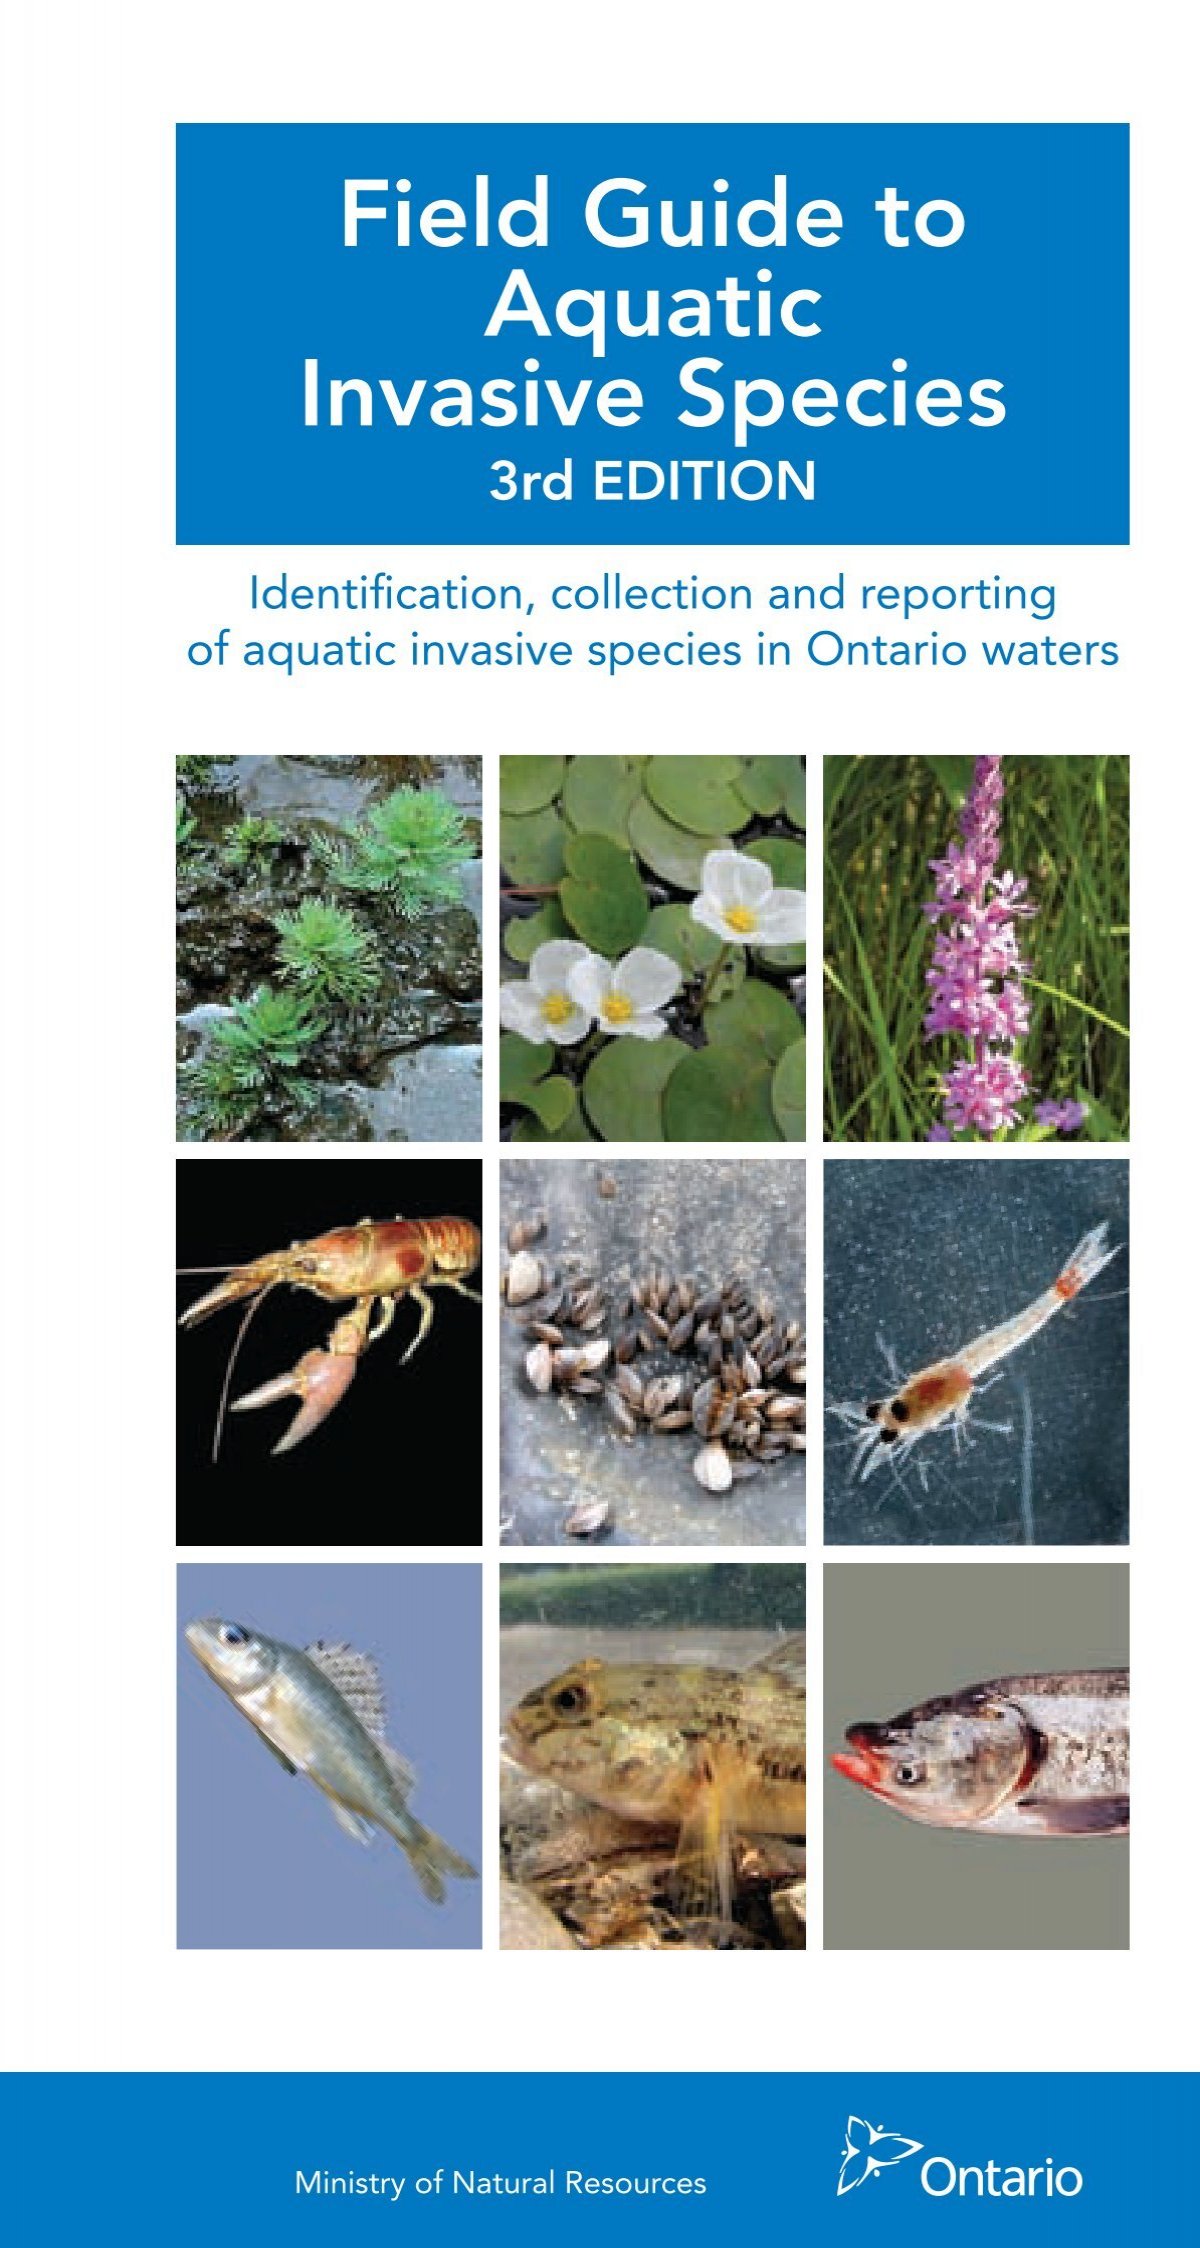 Field Guide to Aquatic Invasive Species - Ministry of Natural